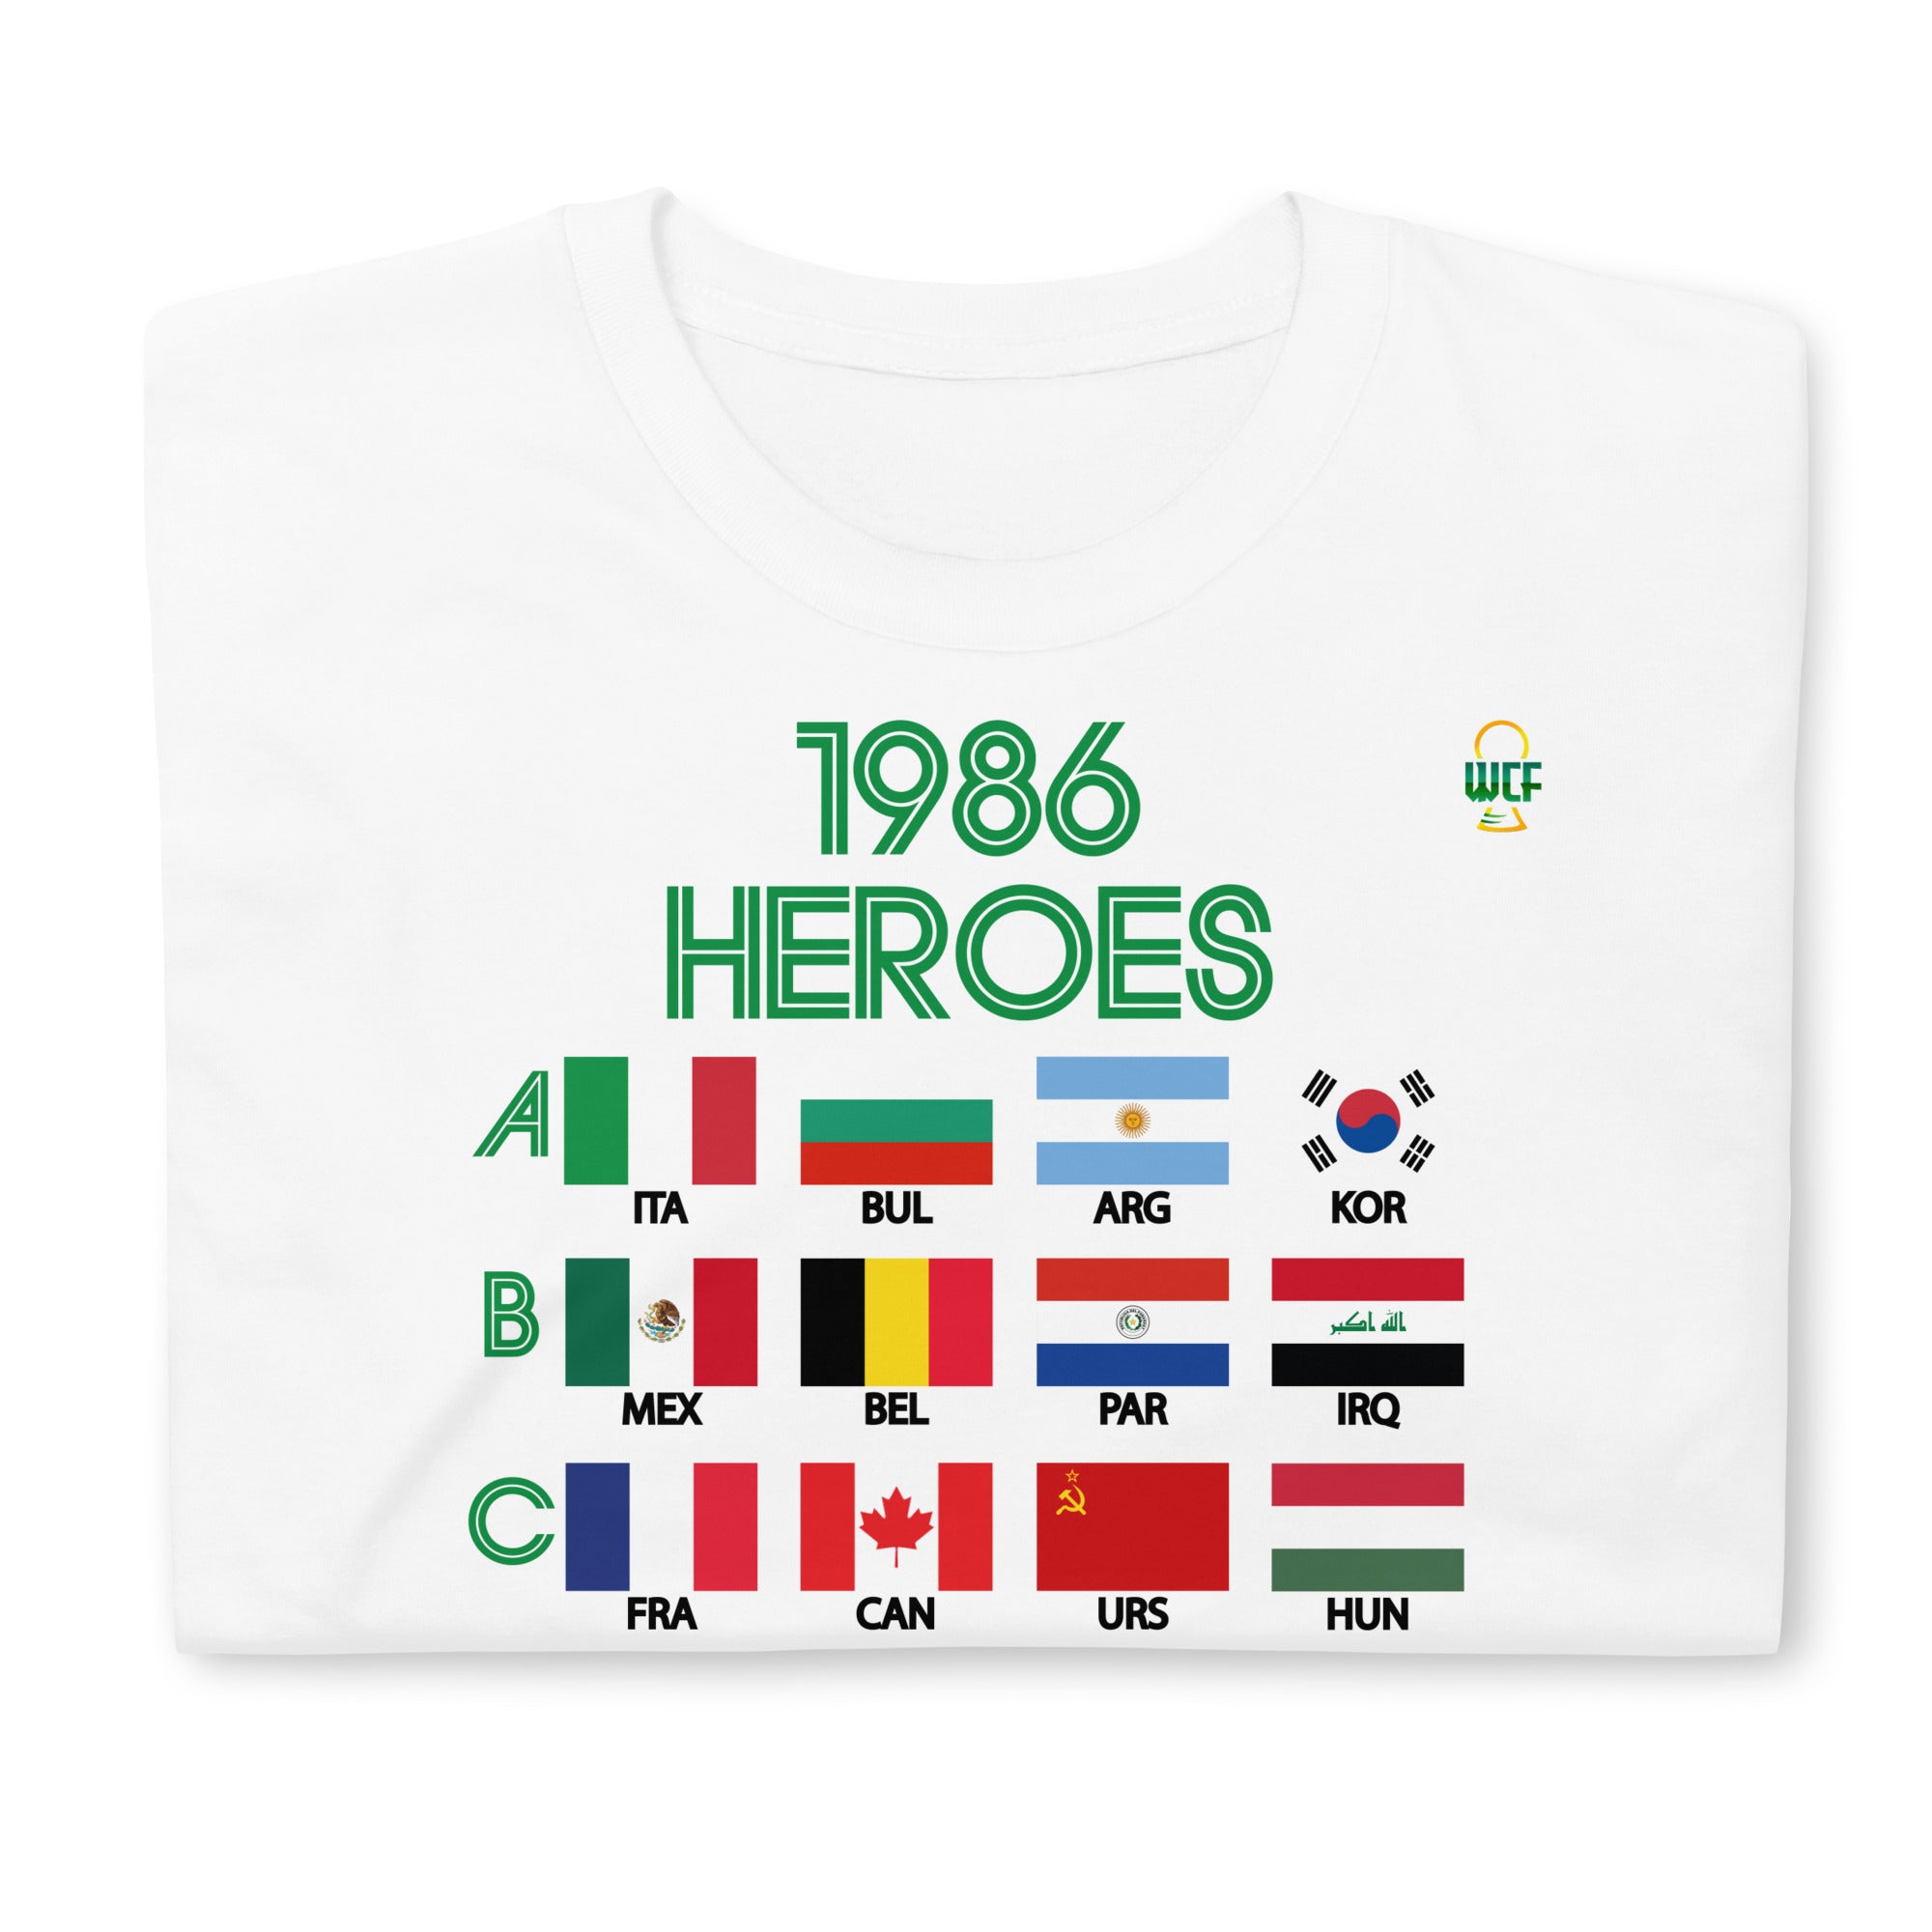 FIFA World Cup Mexico 1986 Softstyle T-Shirt - HEROES